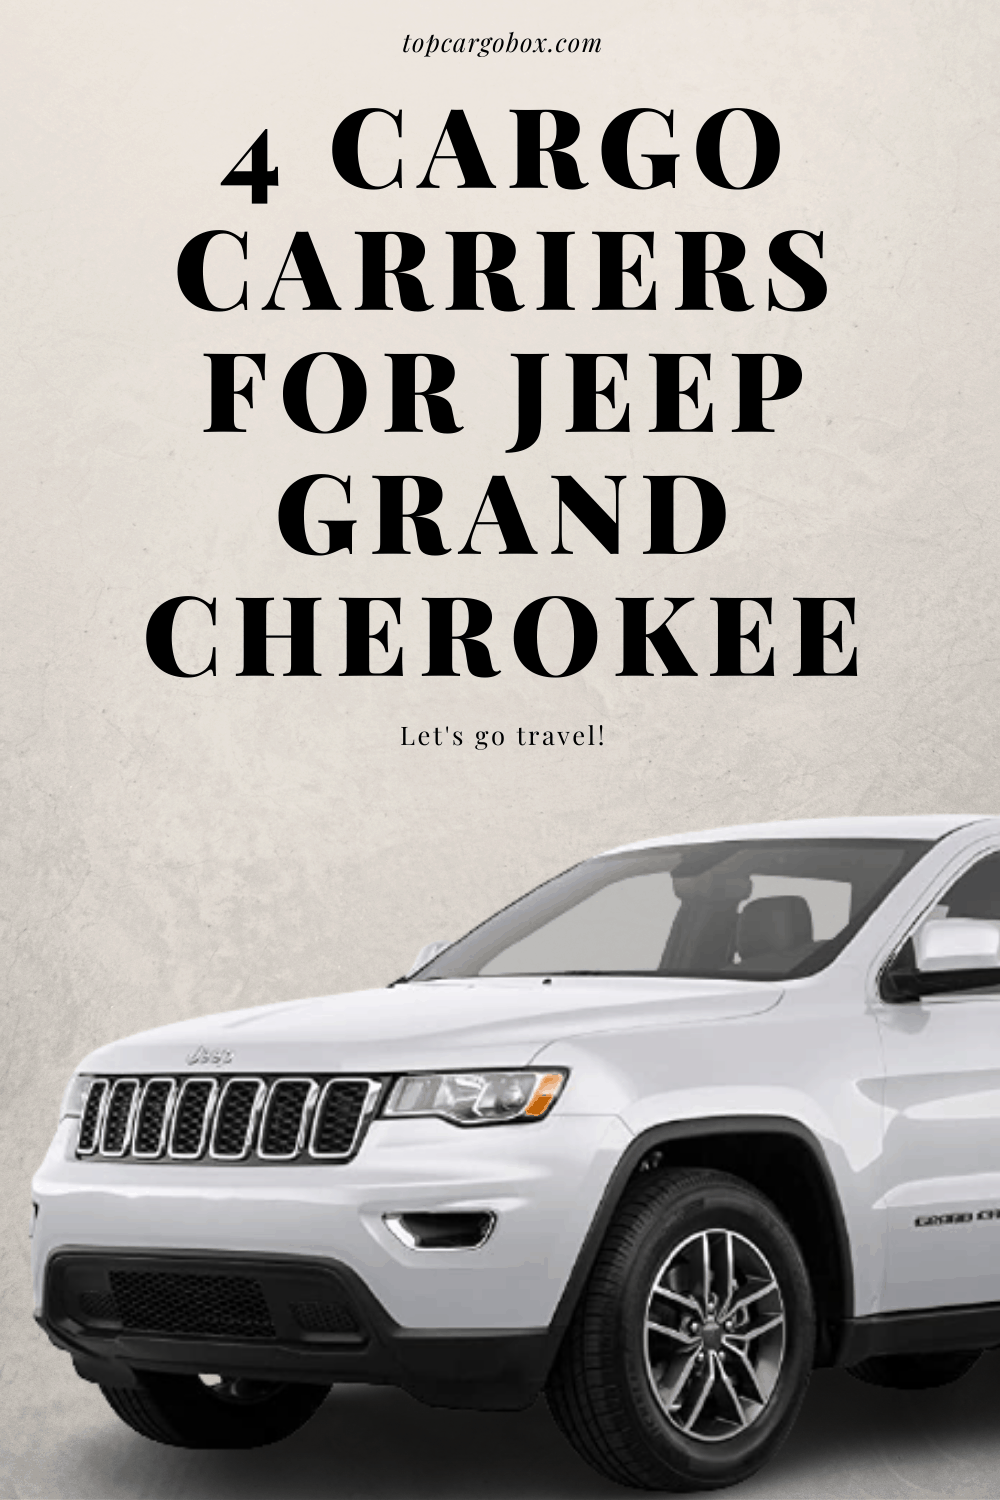 You can find 4 suitable cargo carriers for your Jeep Grand Cherokee.